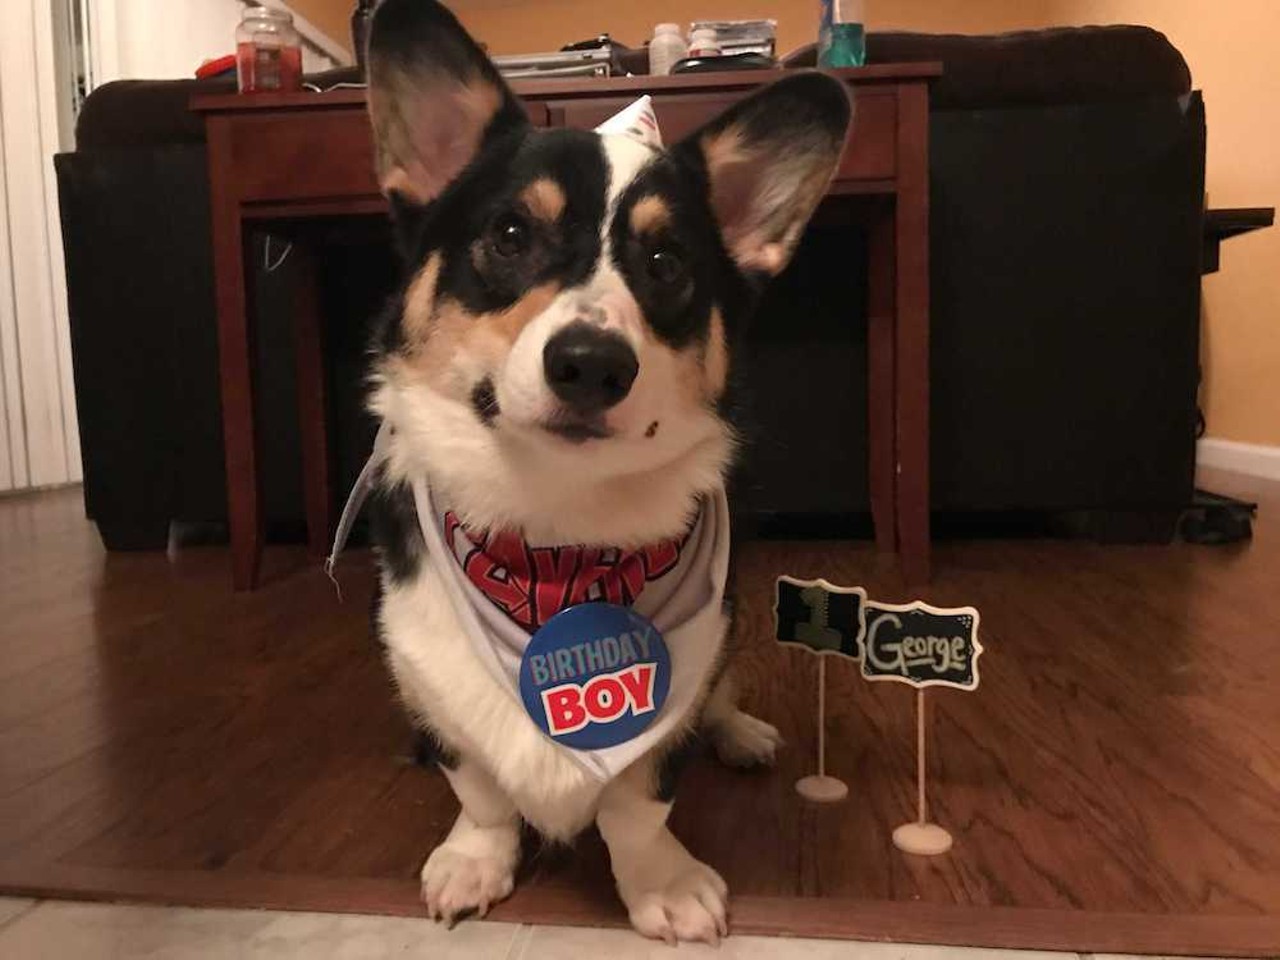 @georgezthecorgi
Our food and drink editor happens to know this pup, and yes, he really is that adorable.
Photo via Chelsea Tatham